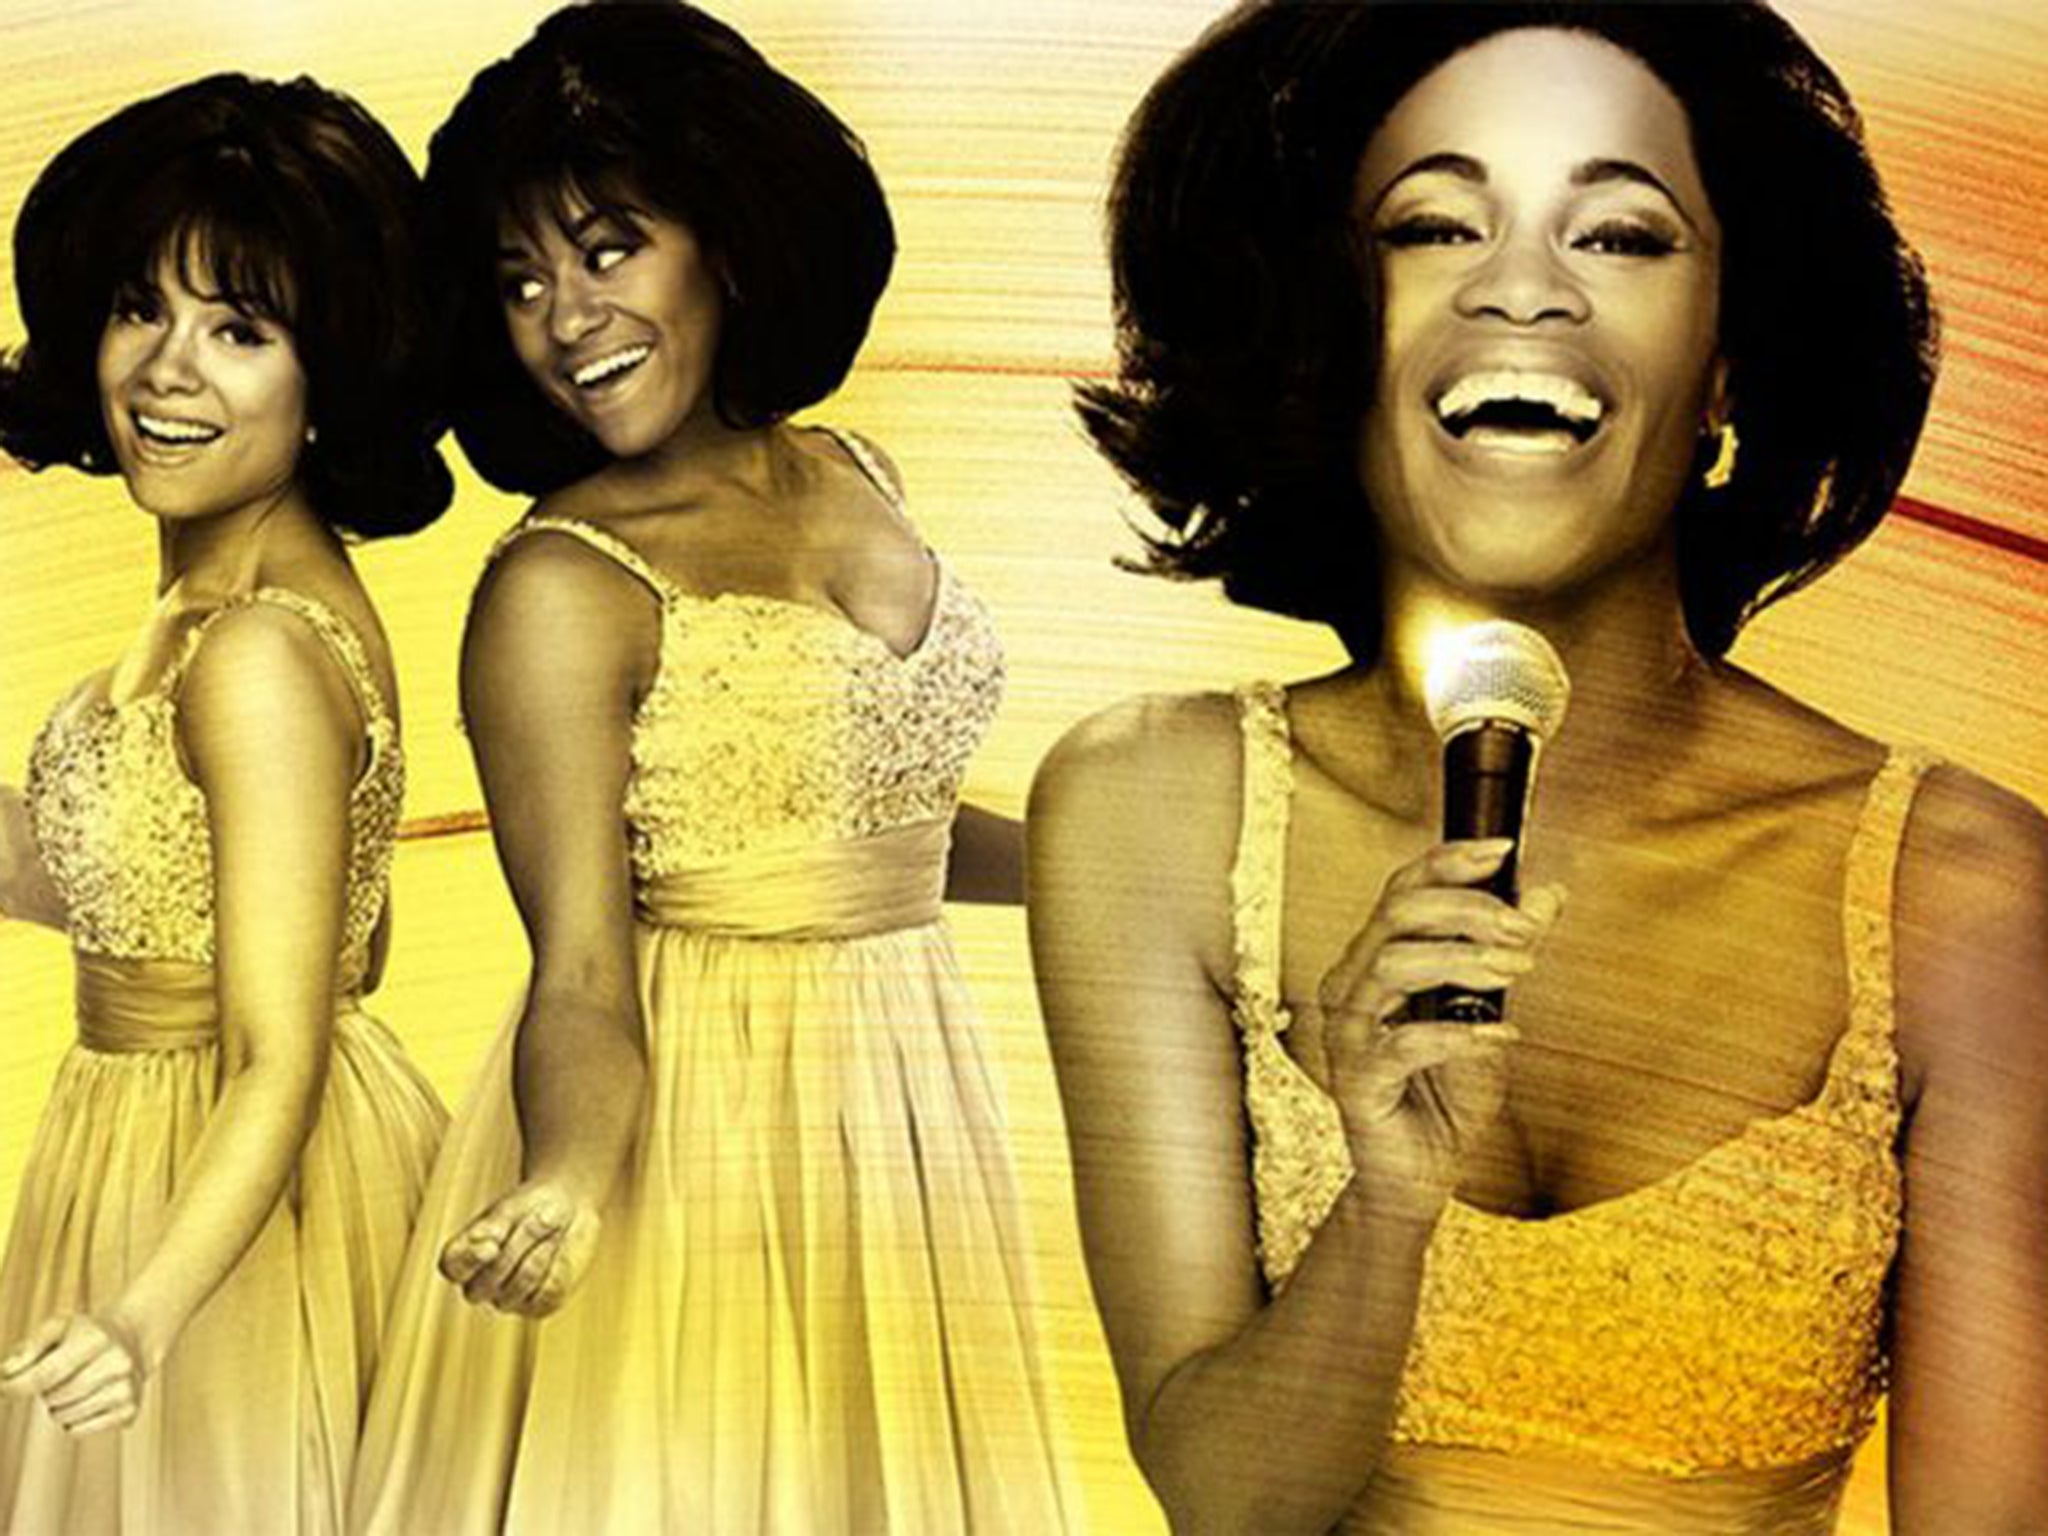 Motown: The Musical, opening at the Shaftesbury Theatre next year, will feature 50 Motown hits